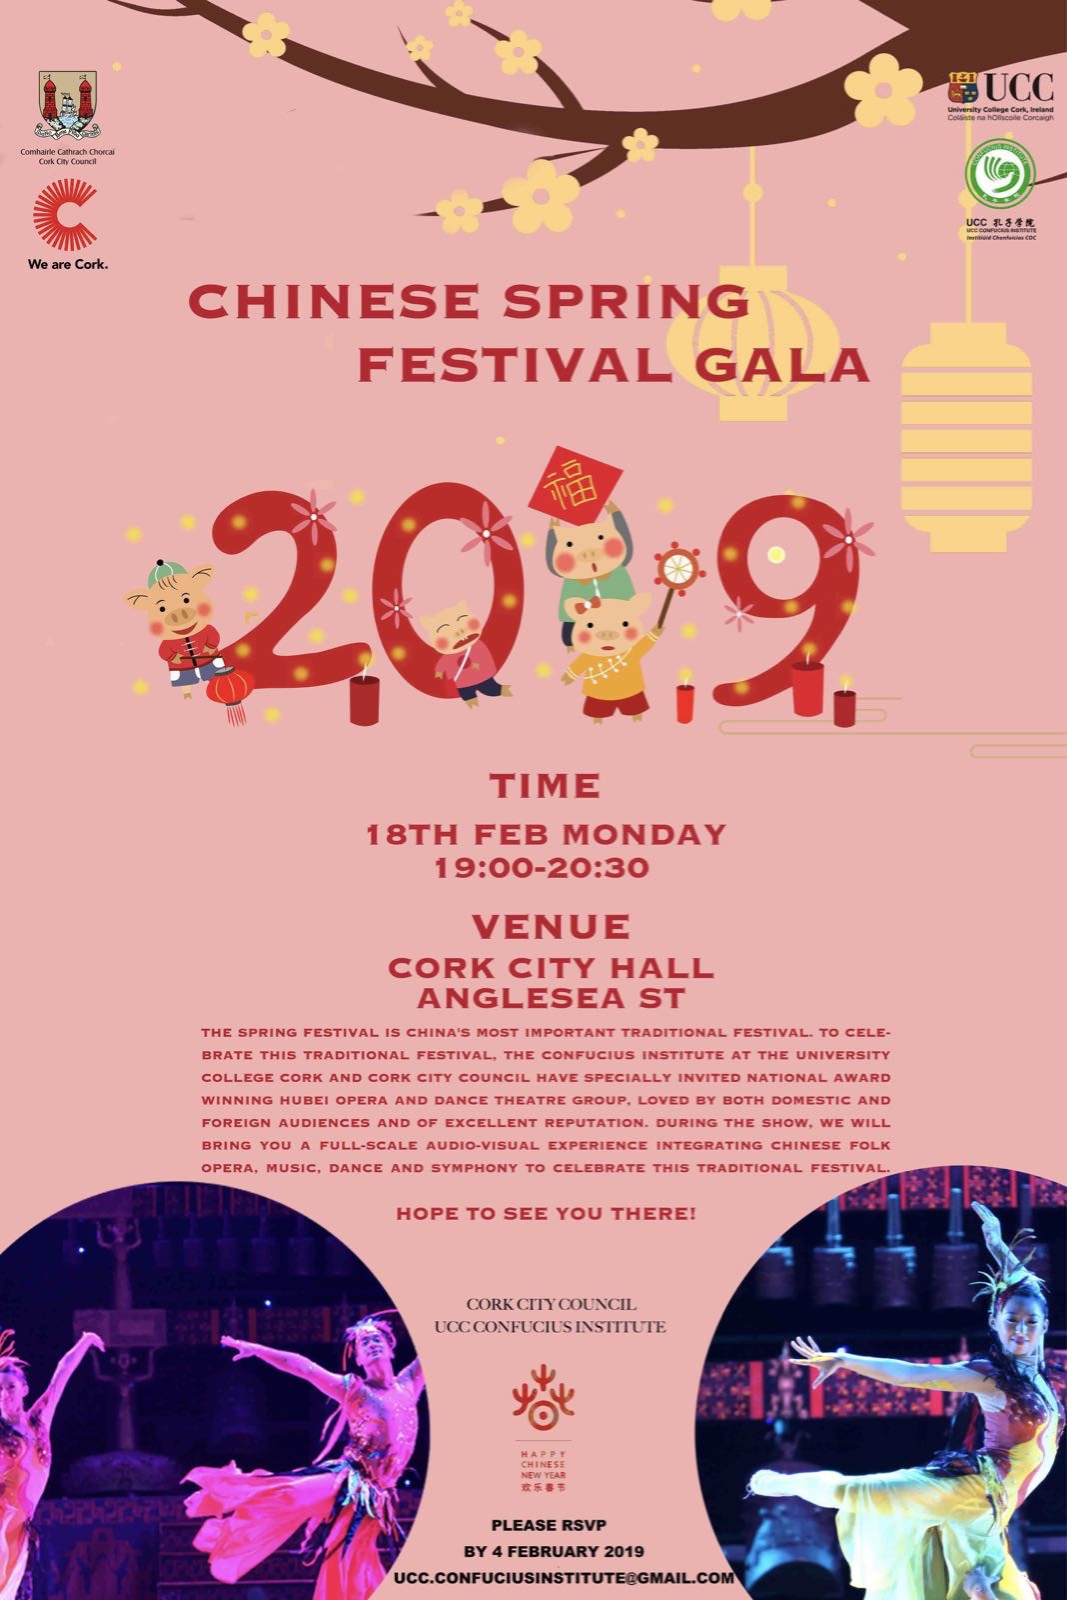 2019 Chinese Spring Festival Gala Can Now Be Booked Online